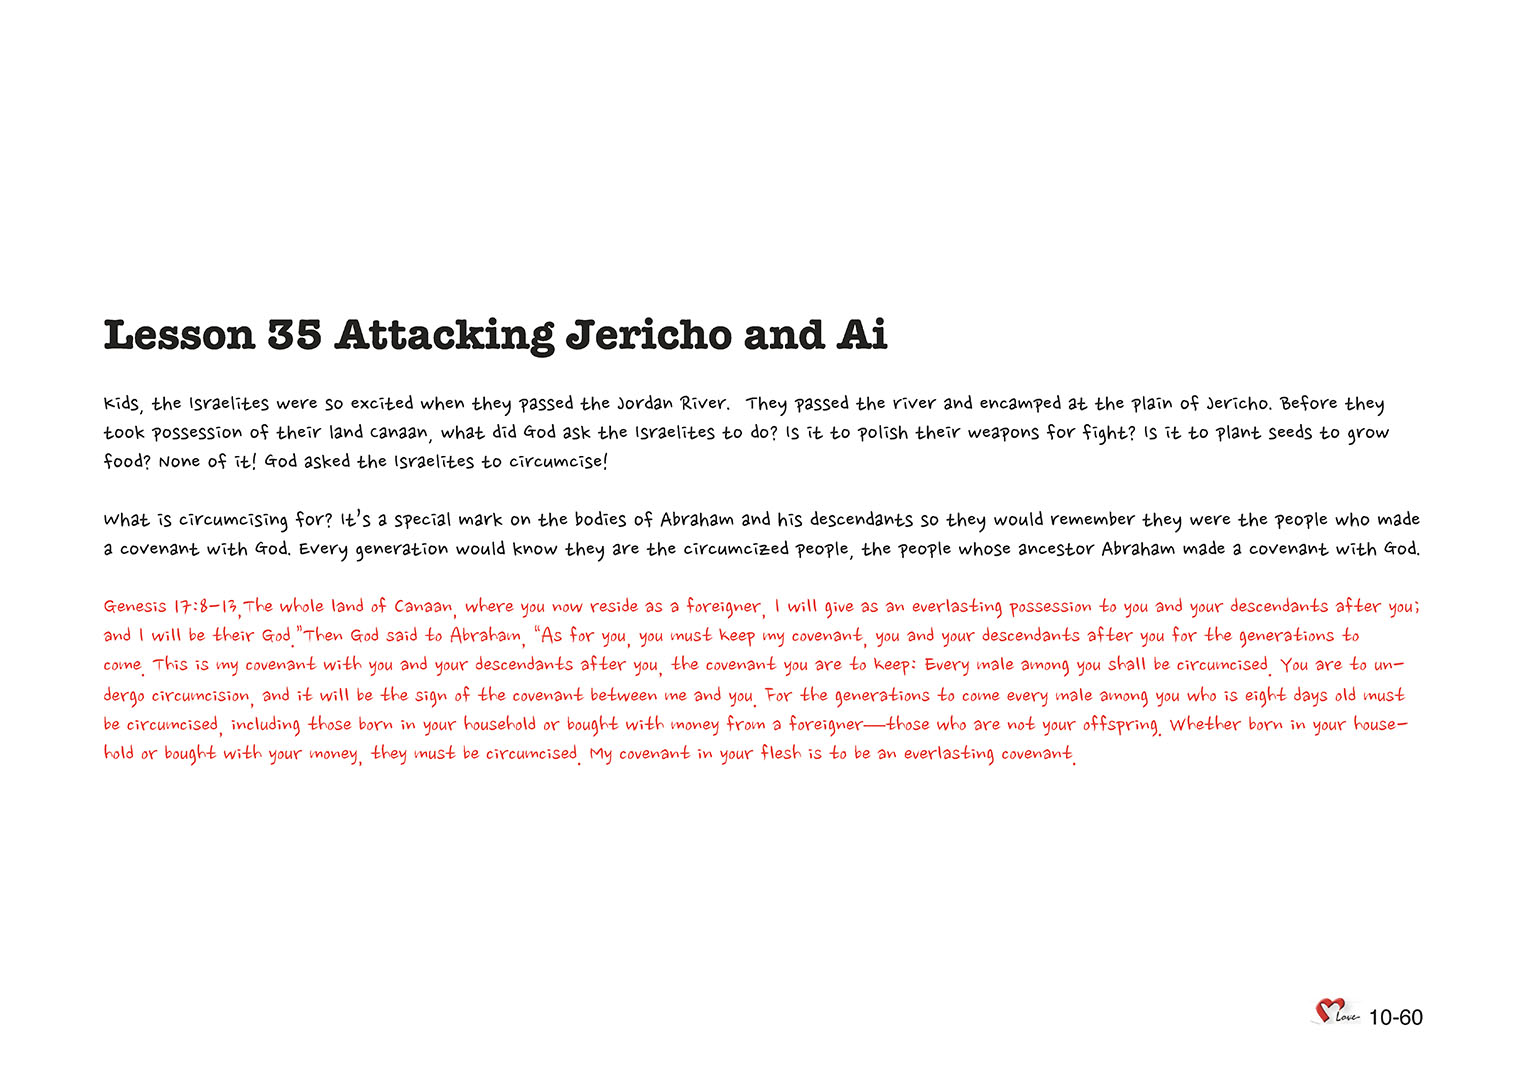 Chapter 10 - Lesson 35 - Attacking Jericho and Ai